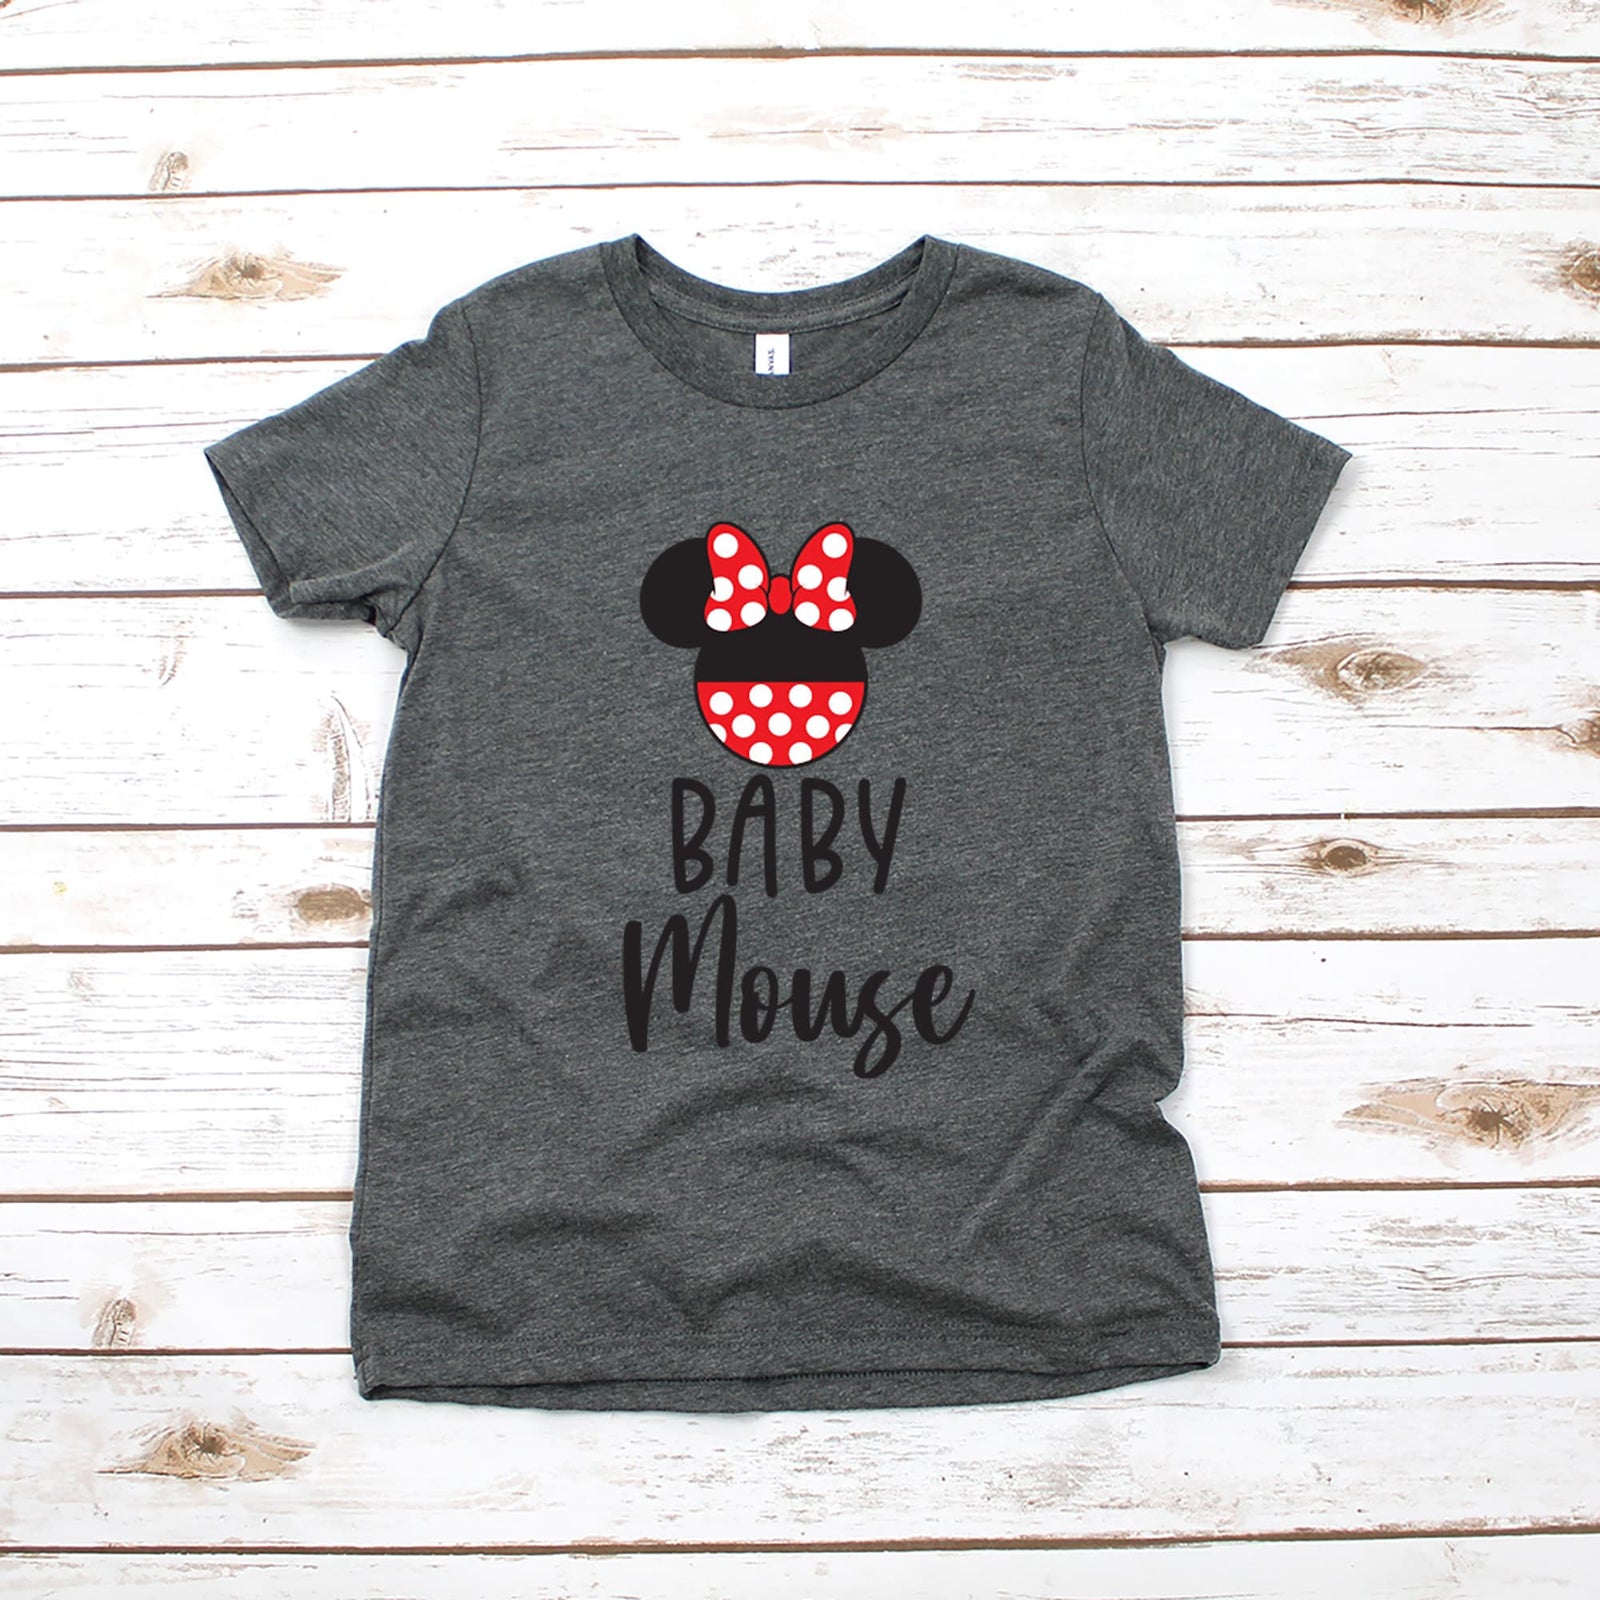 Baby Mouse - Minnie Mouse Disney Kids Shirt - Infant Toddler & Youth Shirt - Personalized Disney Shirt